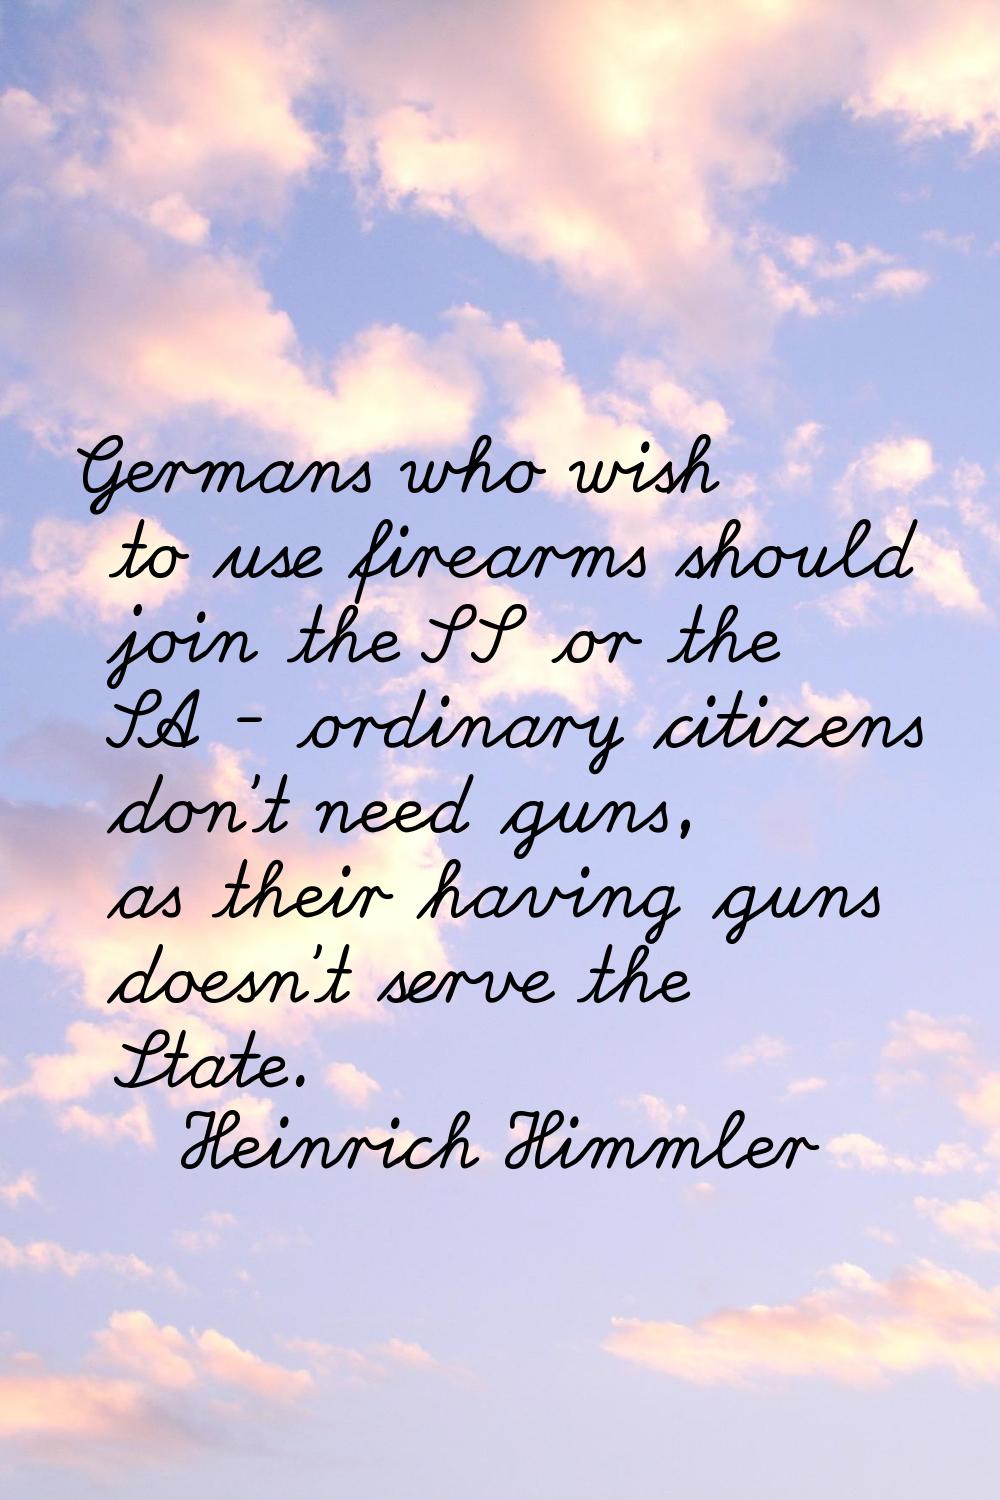 Germans who wish to use firearms should join the SS or the SA - ordinary citizens don't need guns, 